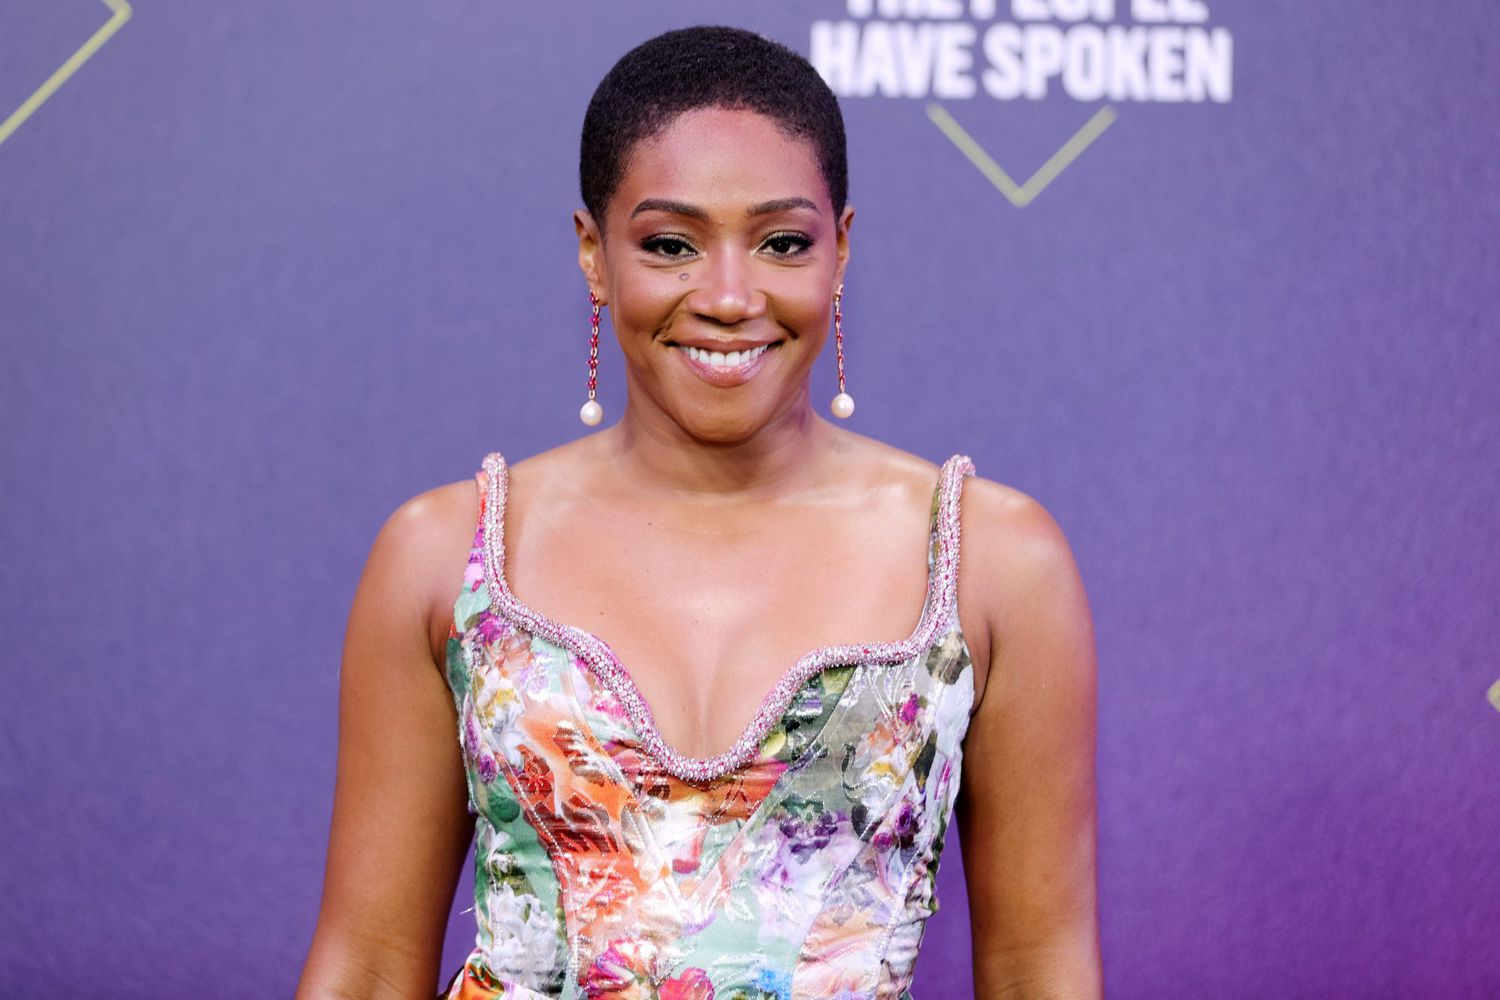 Tiffany Haddish Arrested For DUI In Beverly Hills: Comedian Faces Repeat Offense